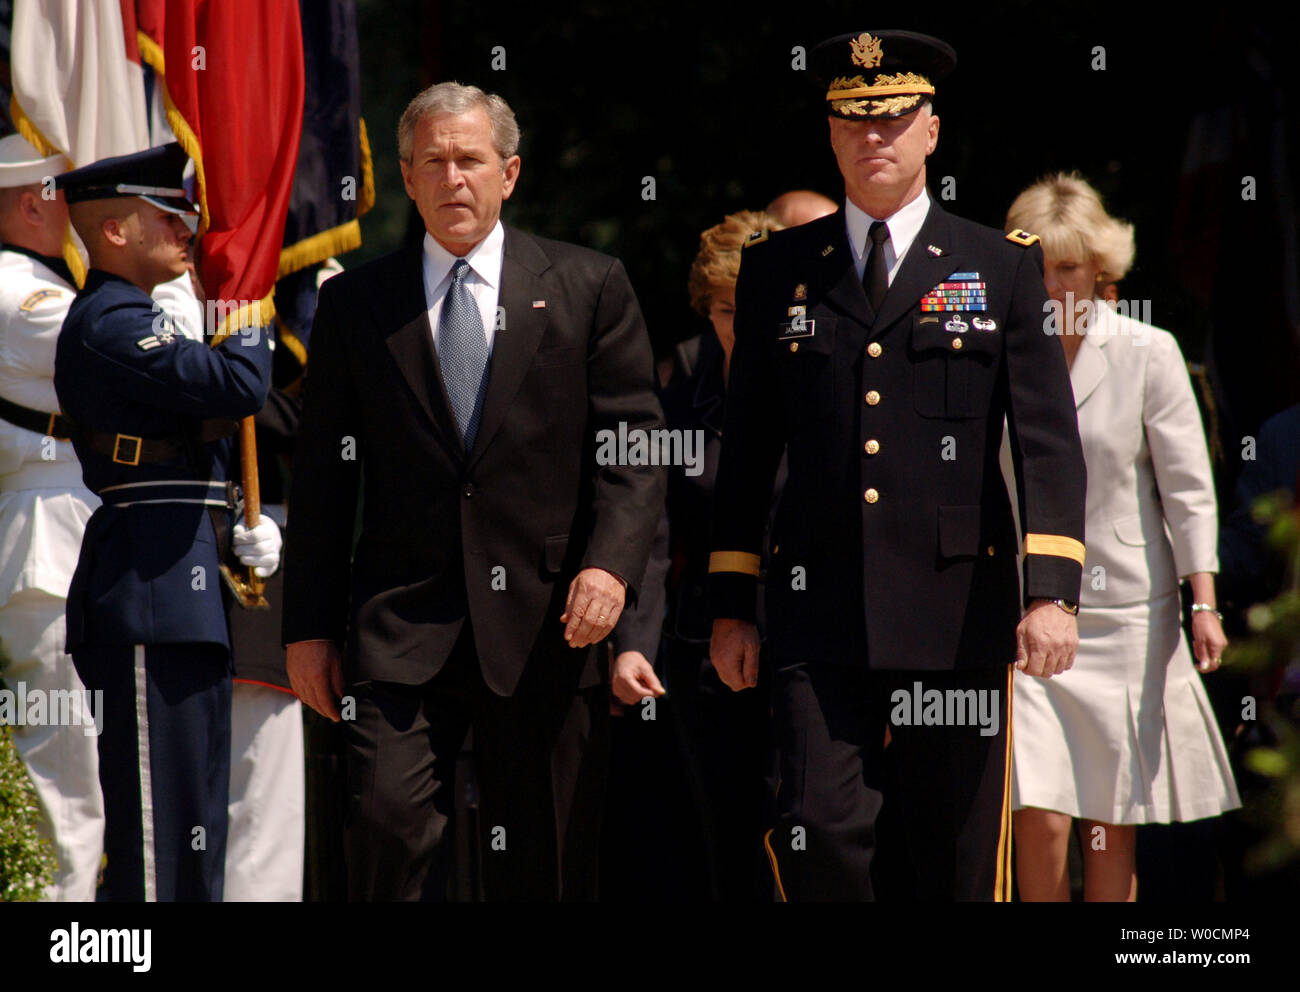 President George W. Bush arrives to participate in a Memorial Day ceremony at the Tomb of the Unknowns, on May 30, 2005 in Arlington National Cemetery. Maj. Gen. Galen B. Jackman stands on the President's right.  This year, members of the armed services paid special tribute to those who have died in Iraq and Afghanistan. (UPI Photo/Michael Kleinfeld) Stock Photo